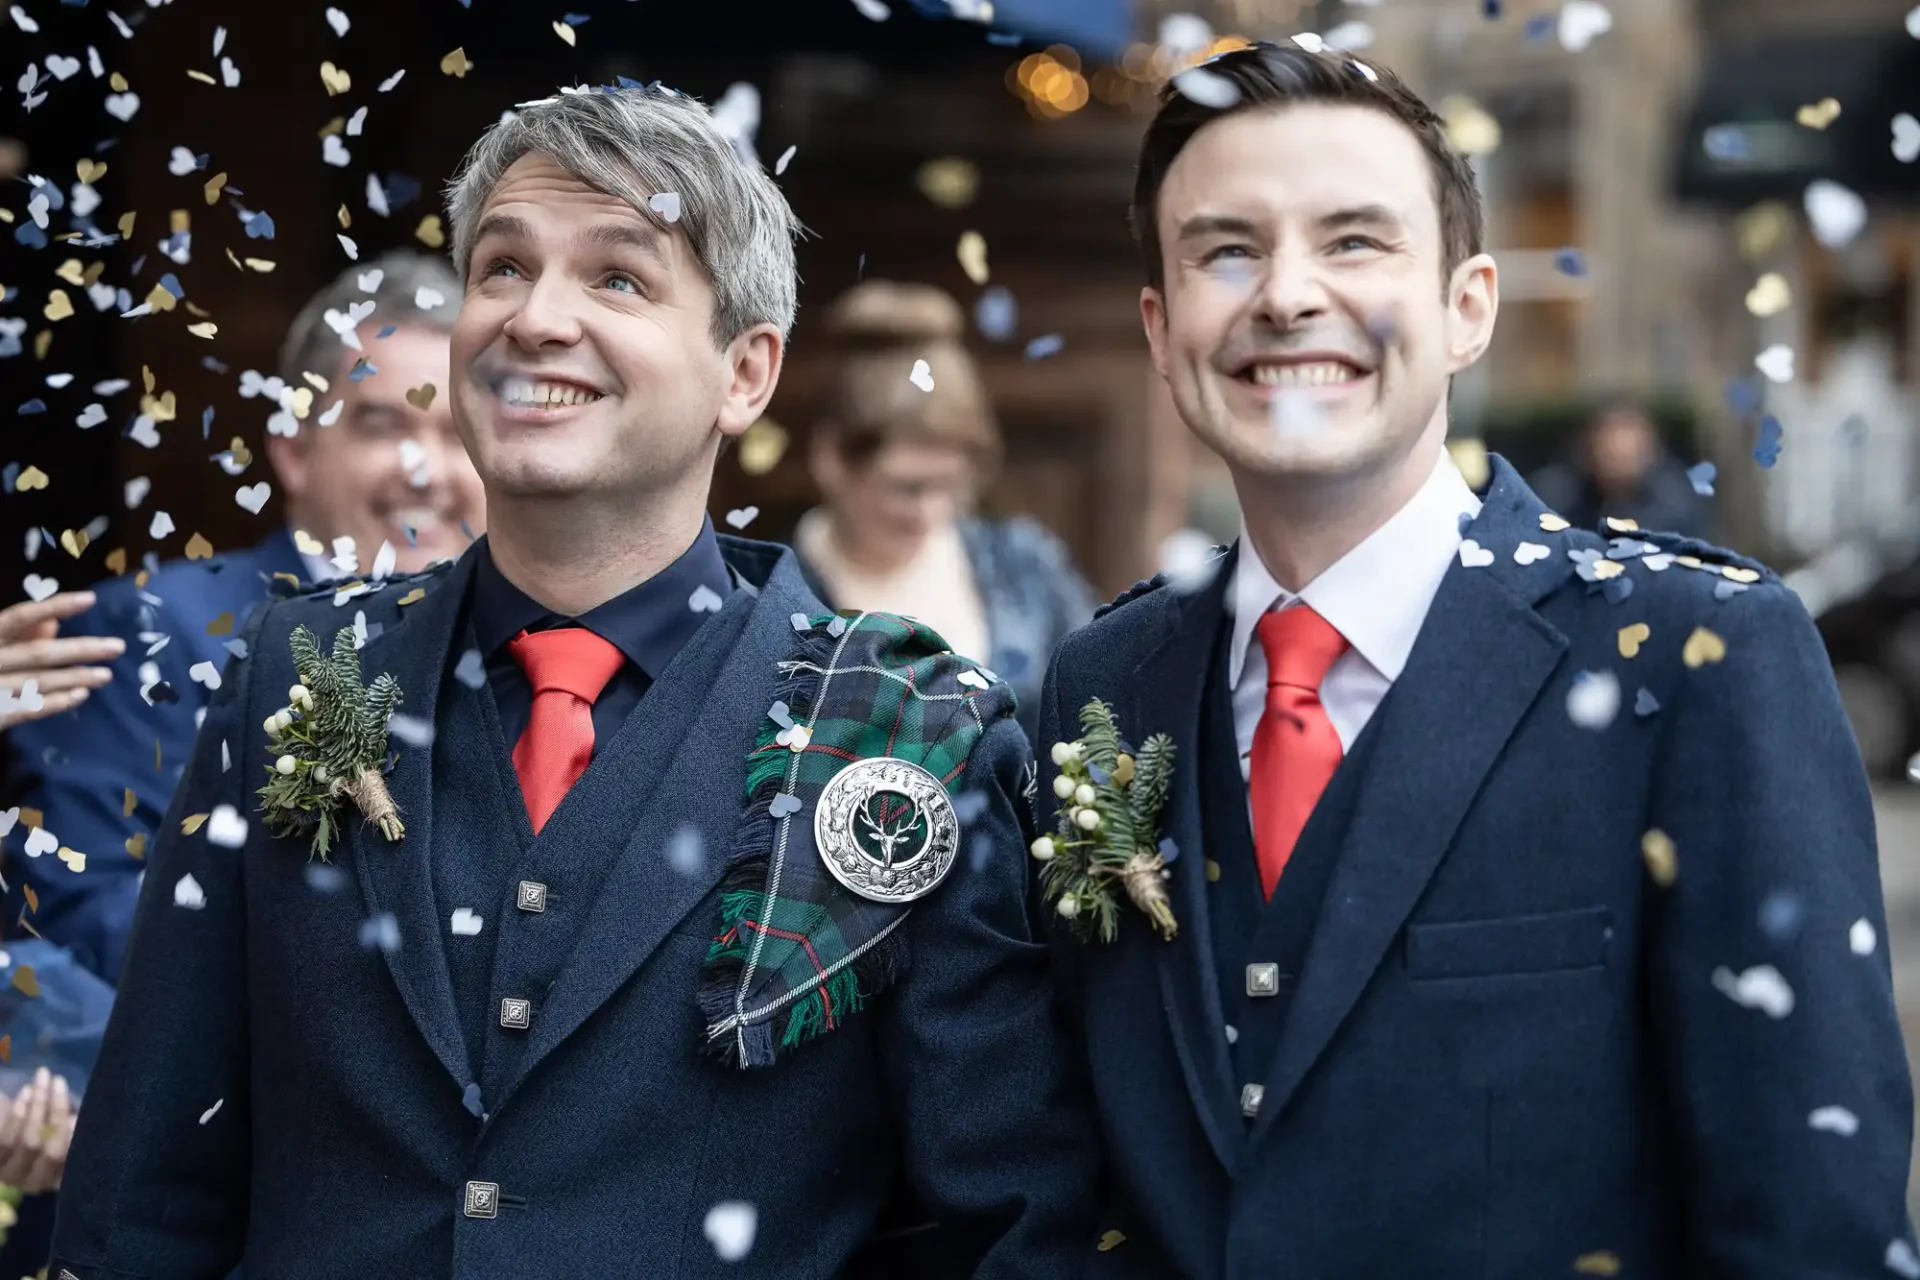 Two grooms in matching blue suits with red ties smile as they are showered with confetti. Both have boutonnières, one has a plaid draped over his shoulder. They look joyful.